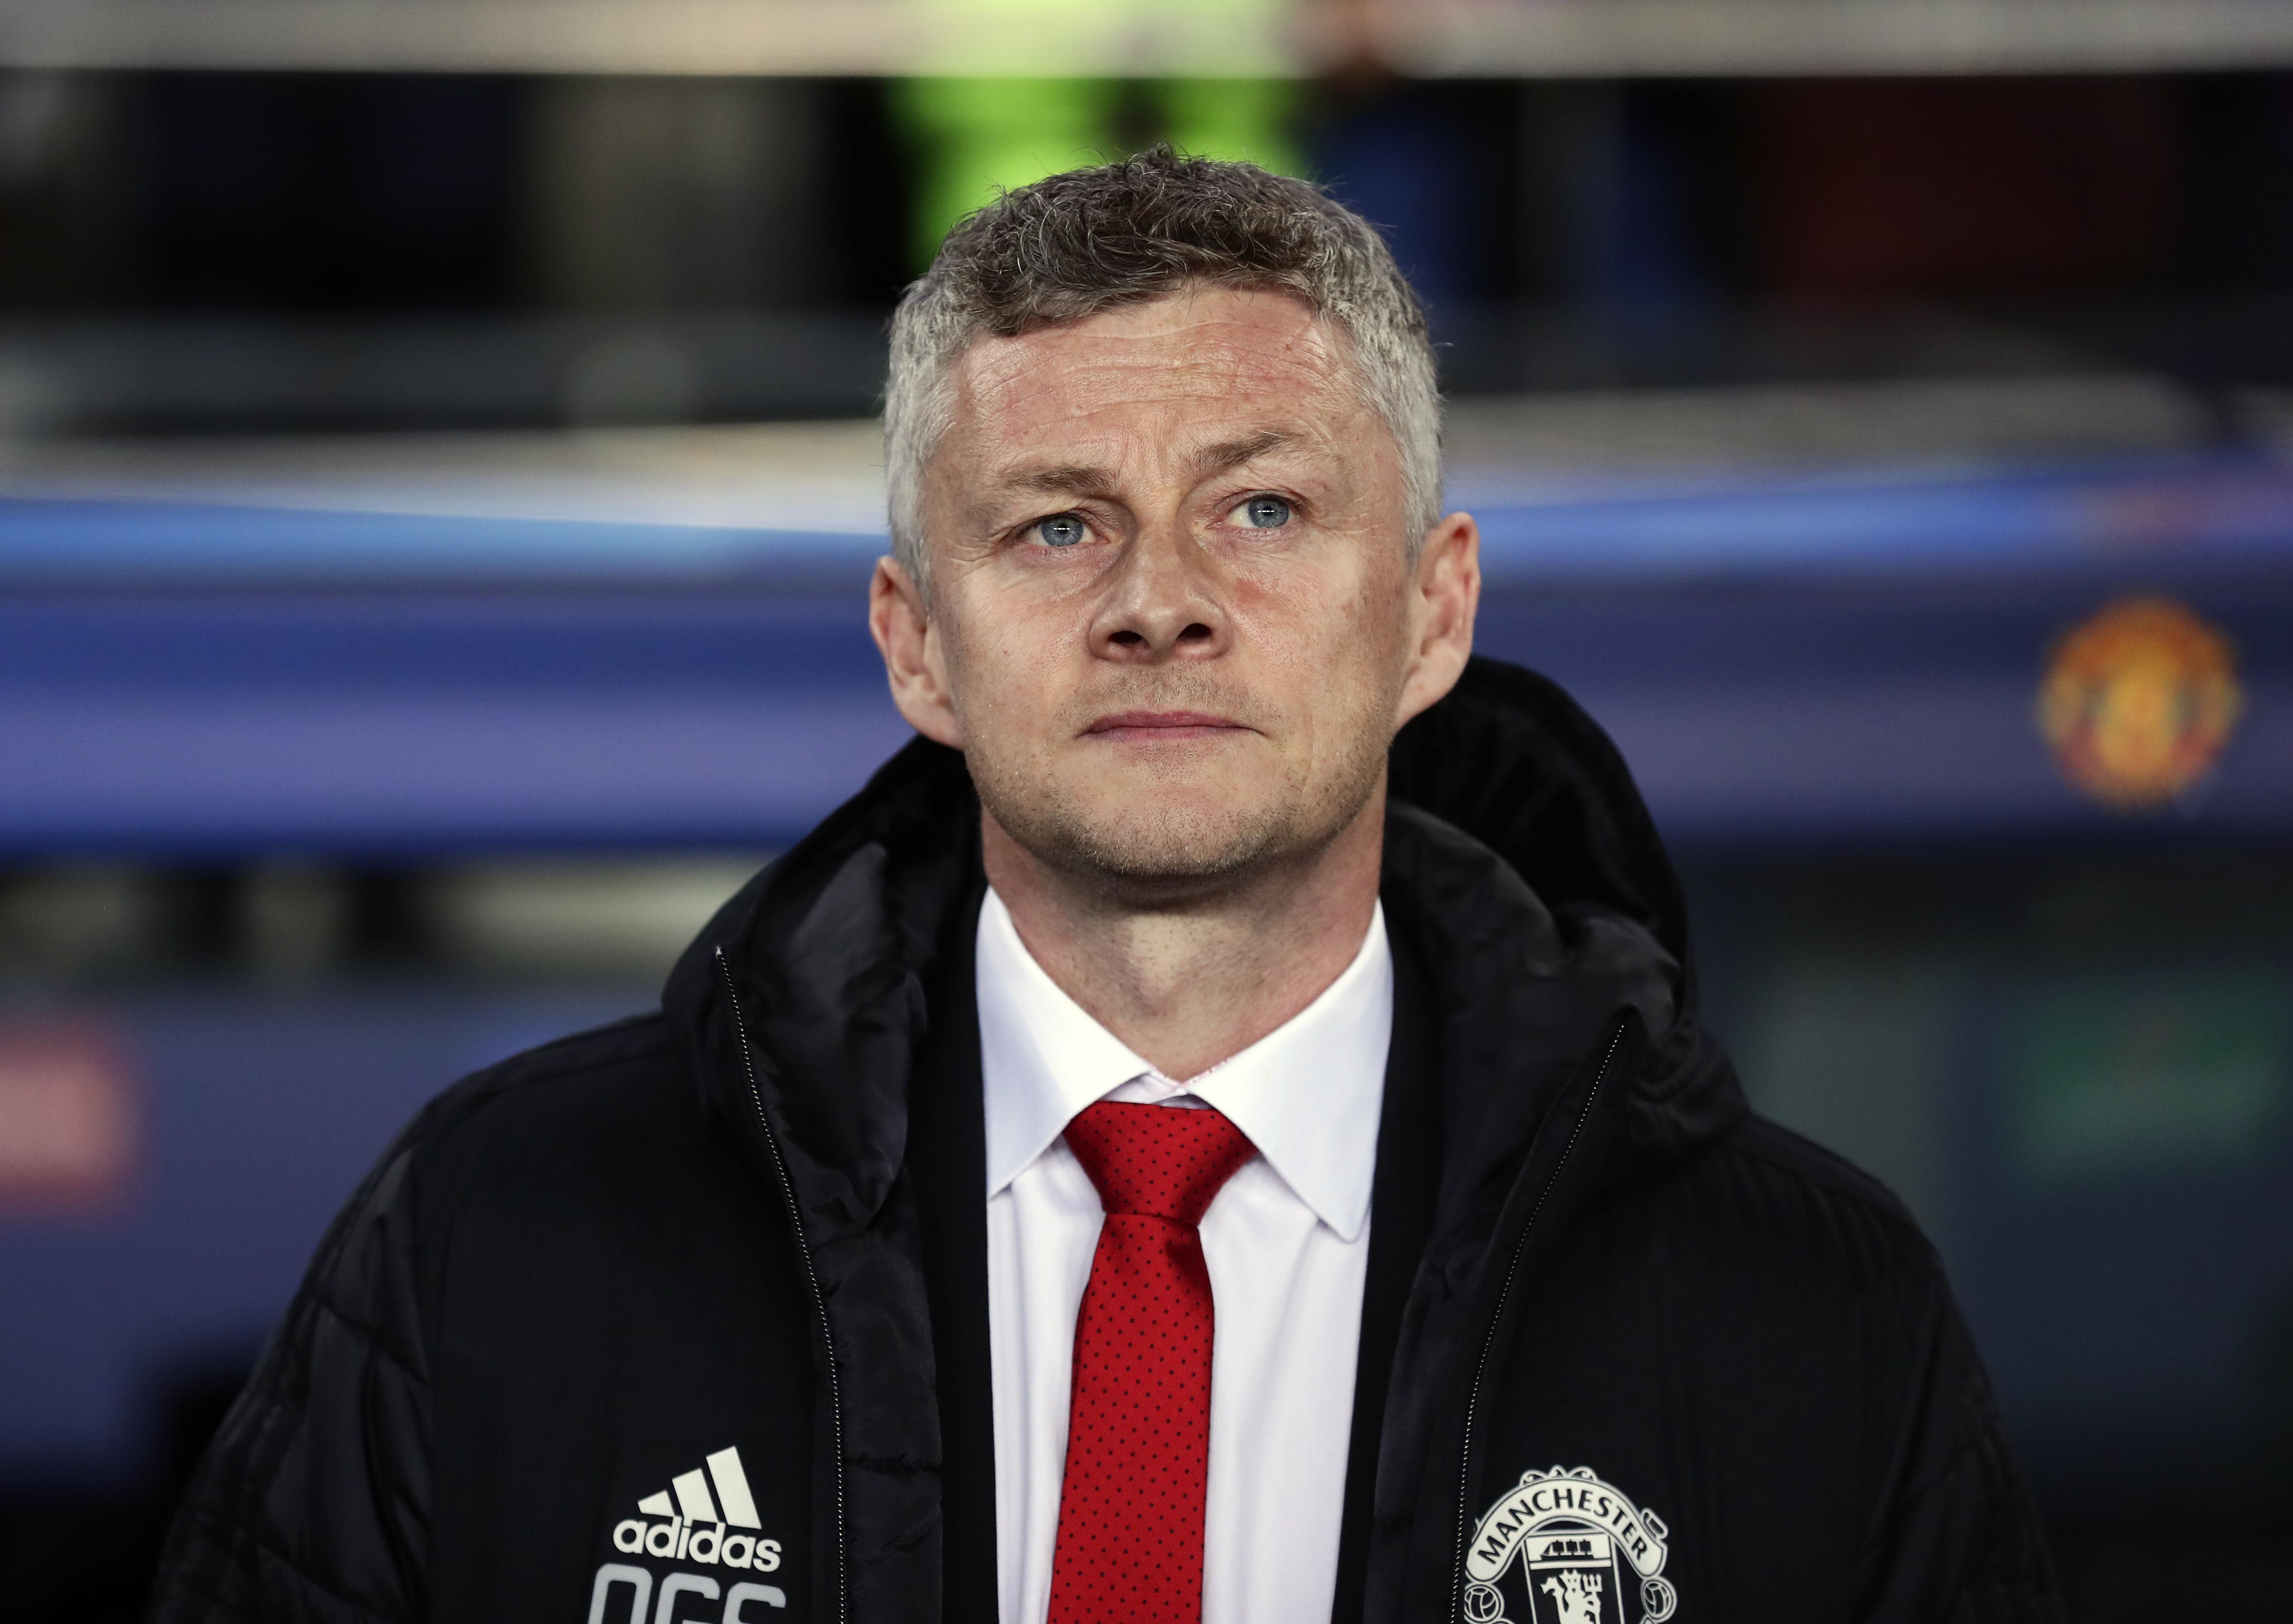 Ole Gunnar Solskjaer to begin much-needed rebuilding job at United | The Spokesman-Review4825 x 3418